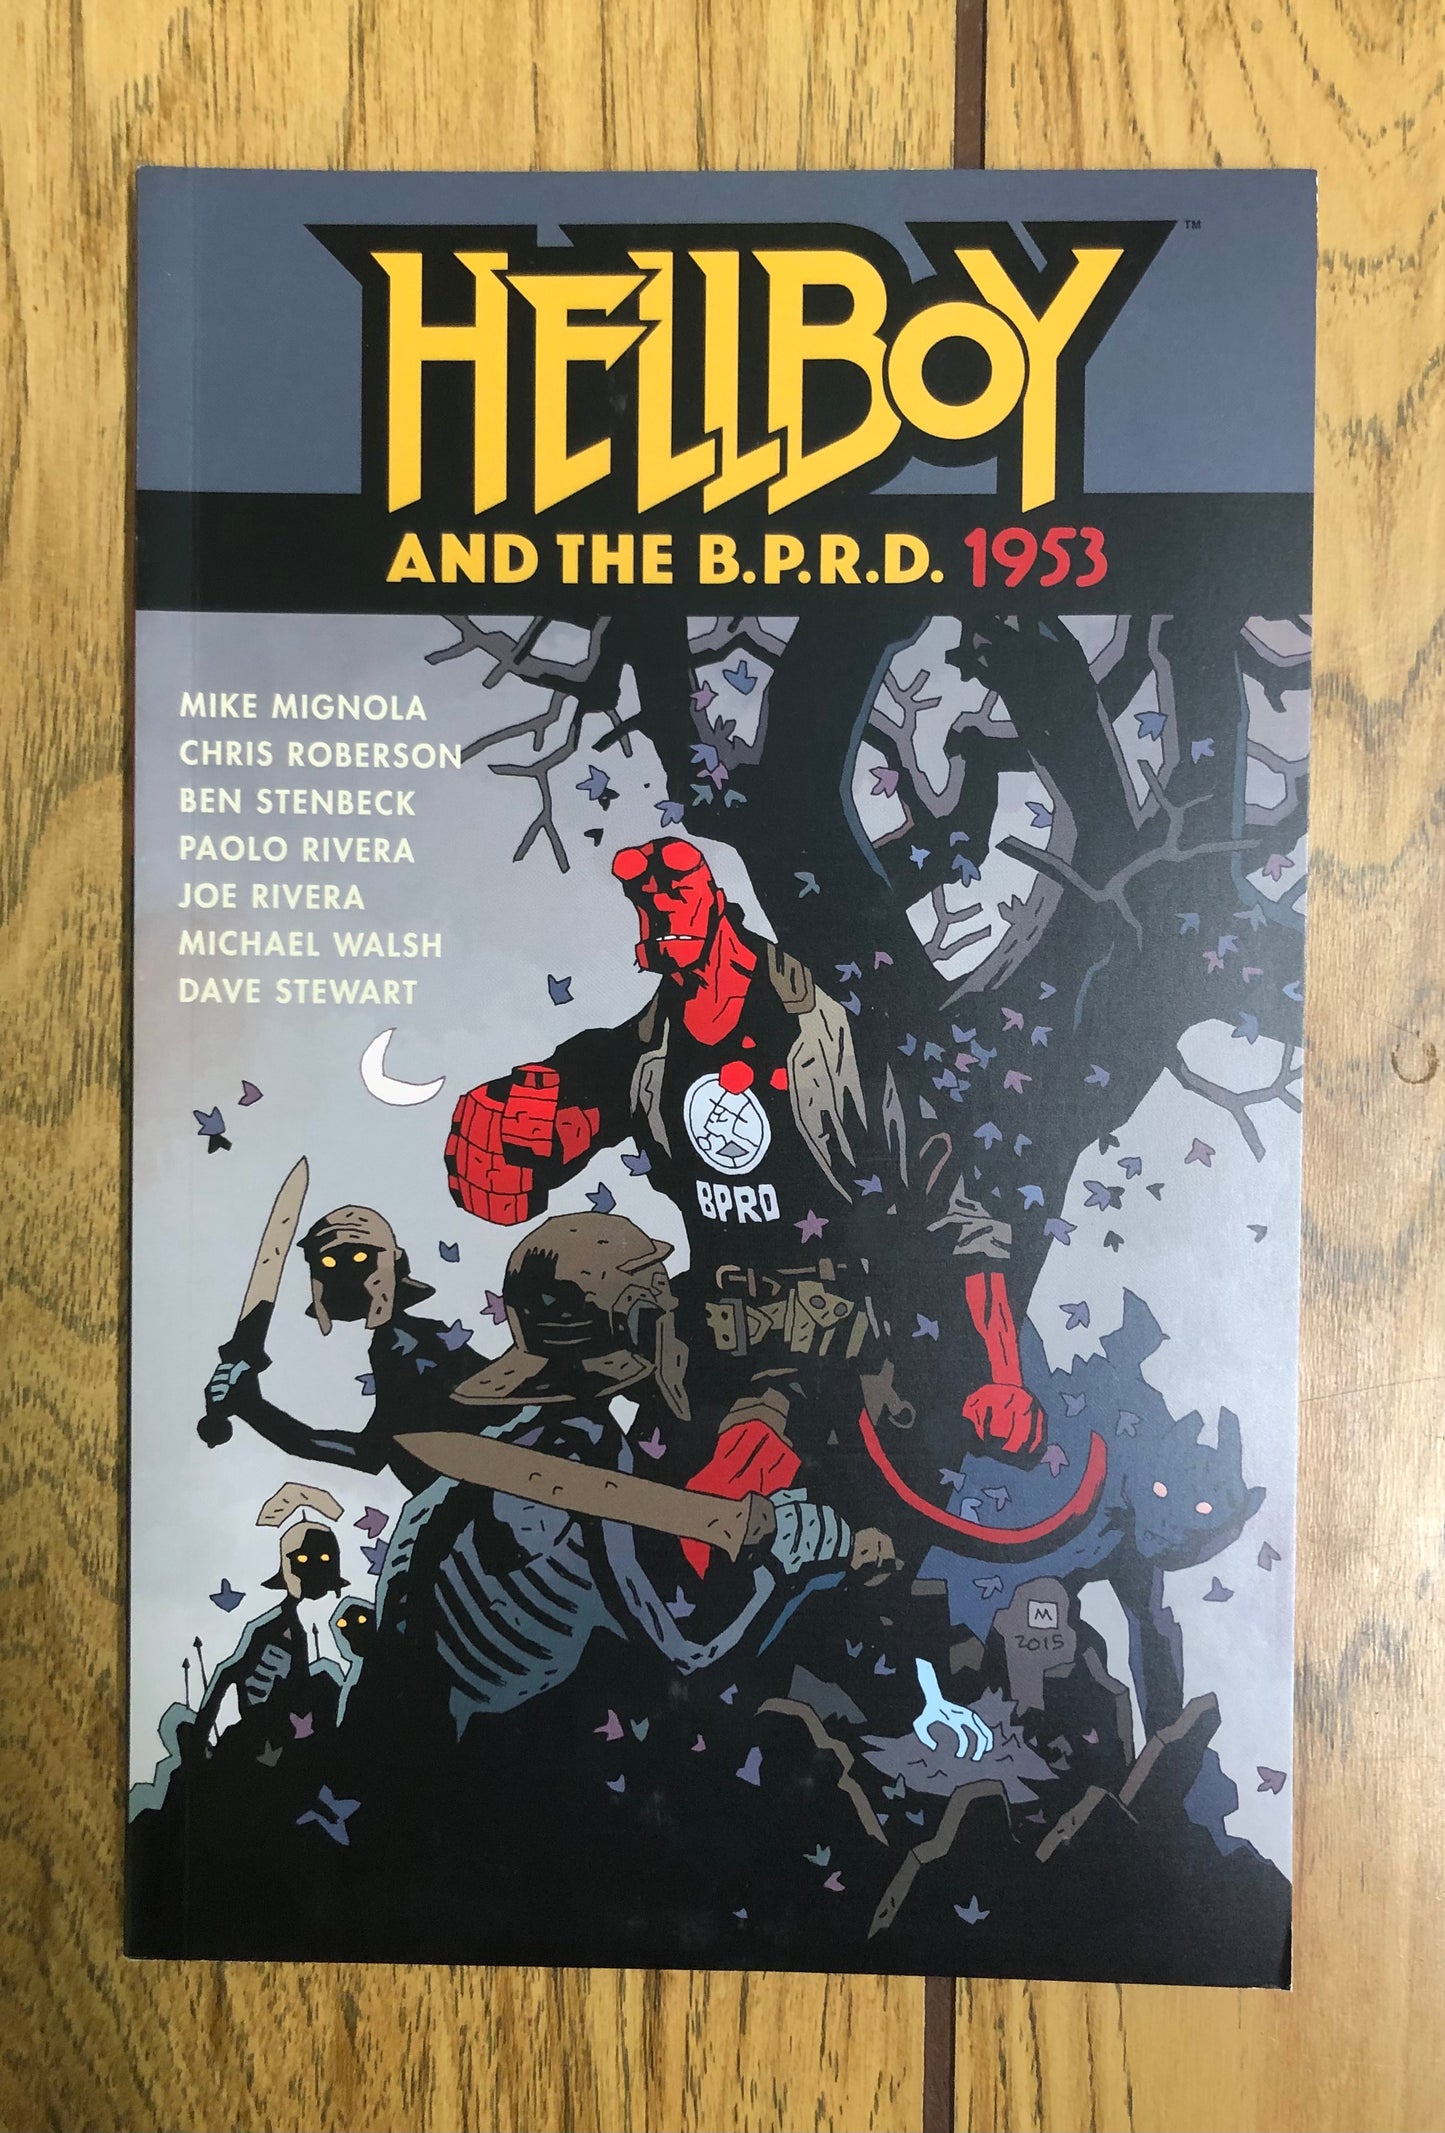 Hellboy and the B.P.R.D, 1953